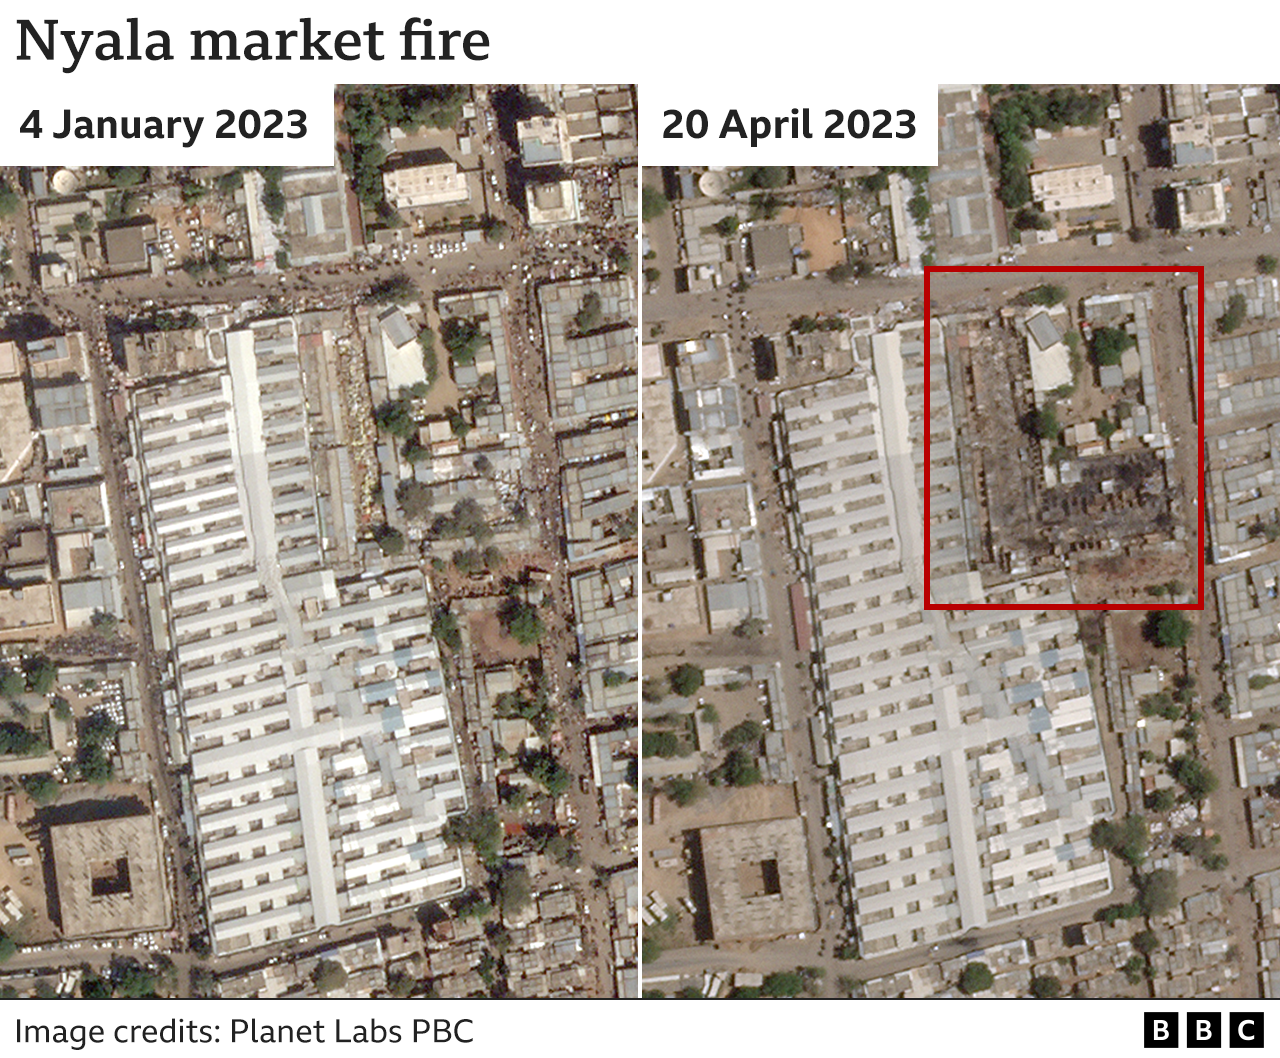 A satellite image shows fire damage at a market in Nyala